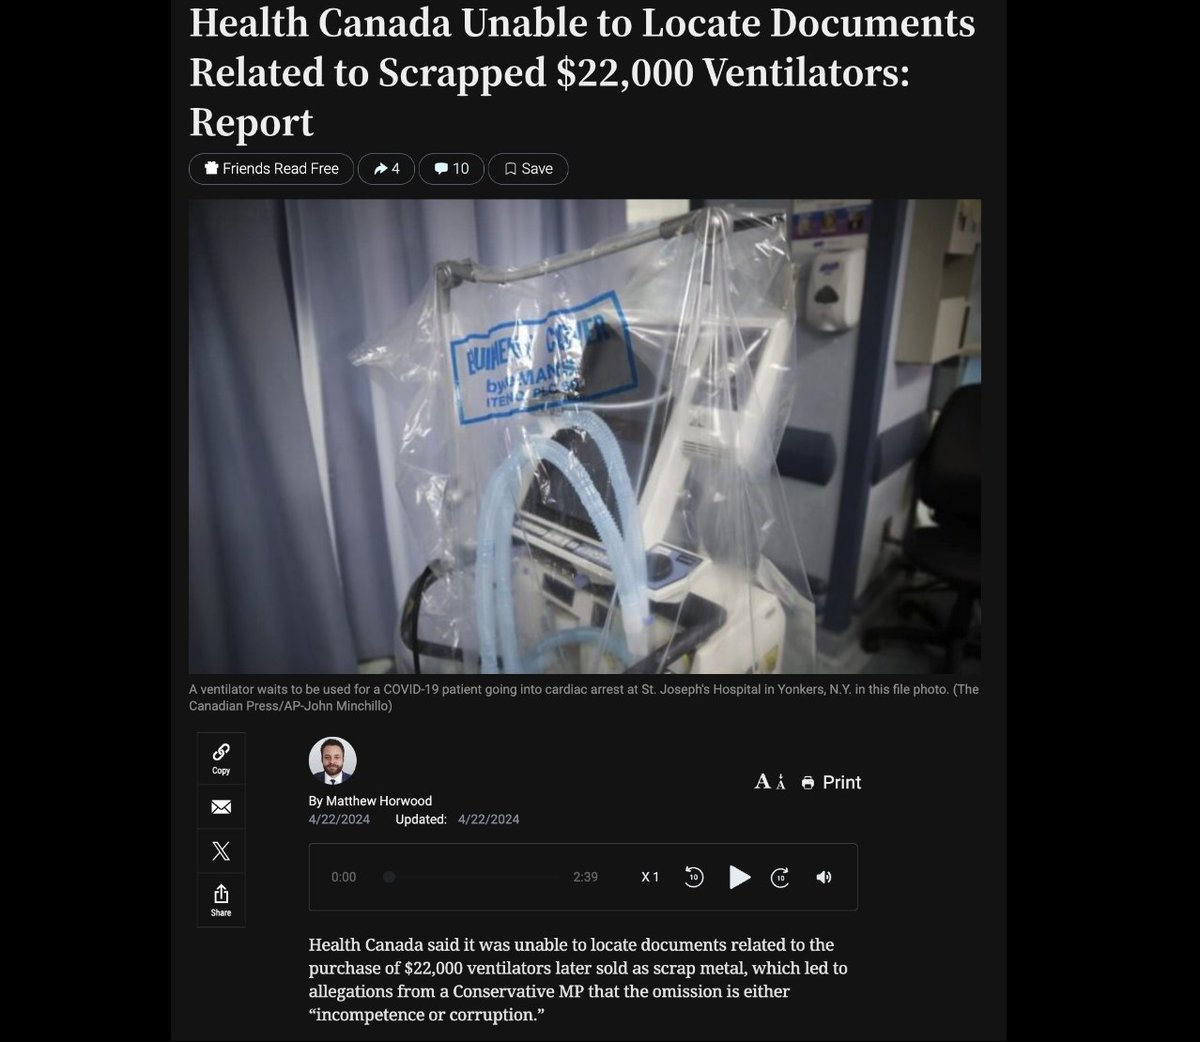 'Health Canada said it was unable to locate documents related to the purchase of $22,000 ventilators later sold as scrap metal' Ottawa is a corrupt, money-wasting machine. Alberta's independence is the solution to our chronic Ottawa problem. theepochtimes.com/world/health-c…